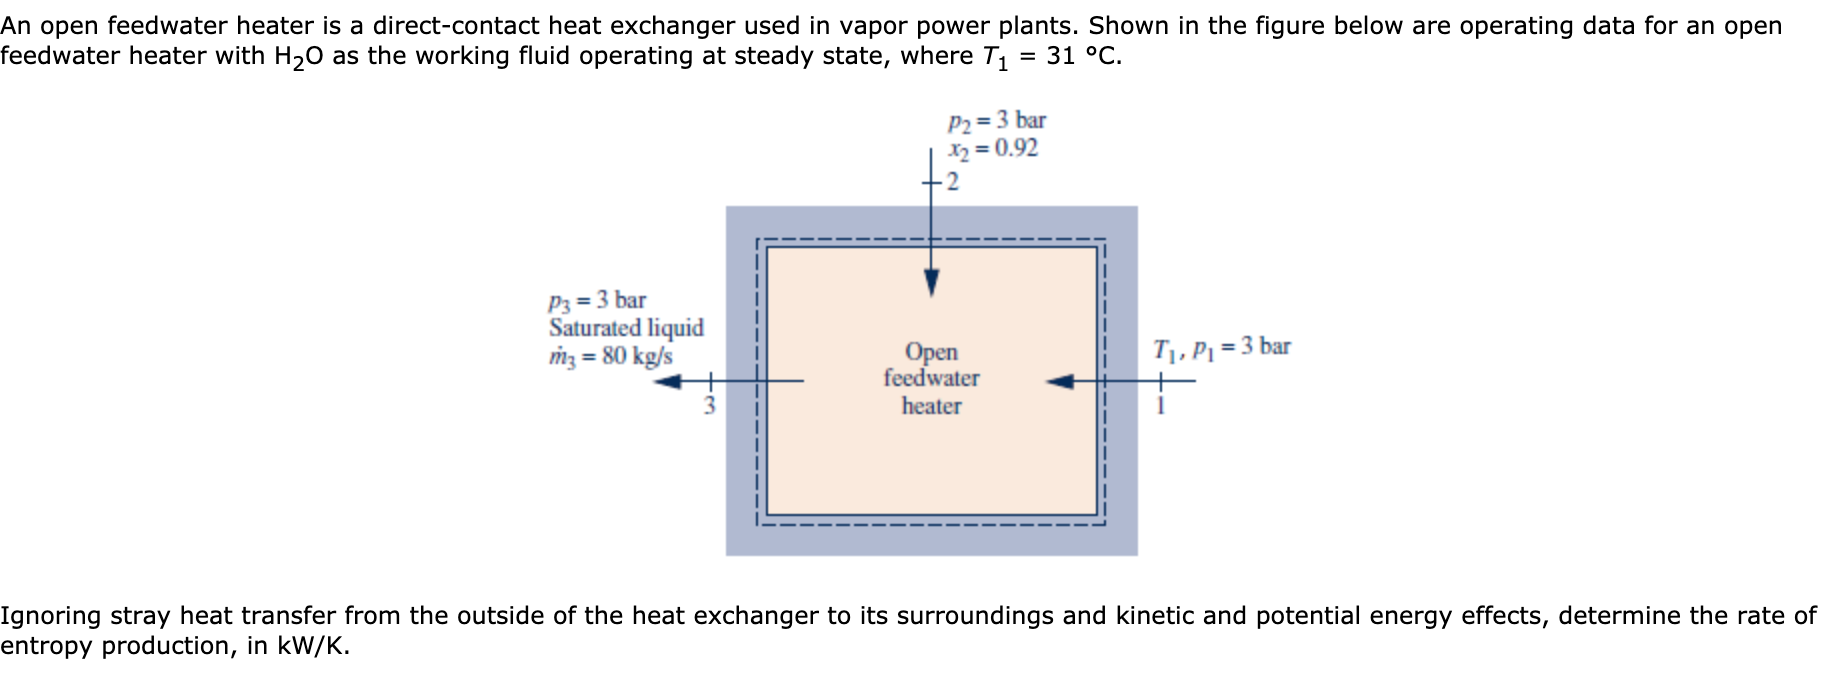 An open feedwater heater is a direct-contact heat exchanger used in vapor power plants. Shown in the figure below are
feedwater heater with H20
operating data for an open
31 °C
as the working fluid operating at steady state, where T1
P2=3 bar
= 0.92
+2
P3 3 bar
Saturated liquid
m380 kg/s
T, PT=3 bar
Open
feedwater
3
heater
Ignoring stray heat transfer from the outside of the heat exchanger to its surroundings and kinetic and potential energy effects, determine the rate of
entropy production, in kW/K.
